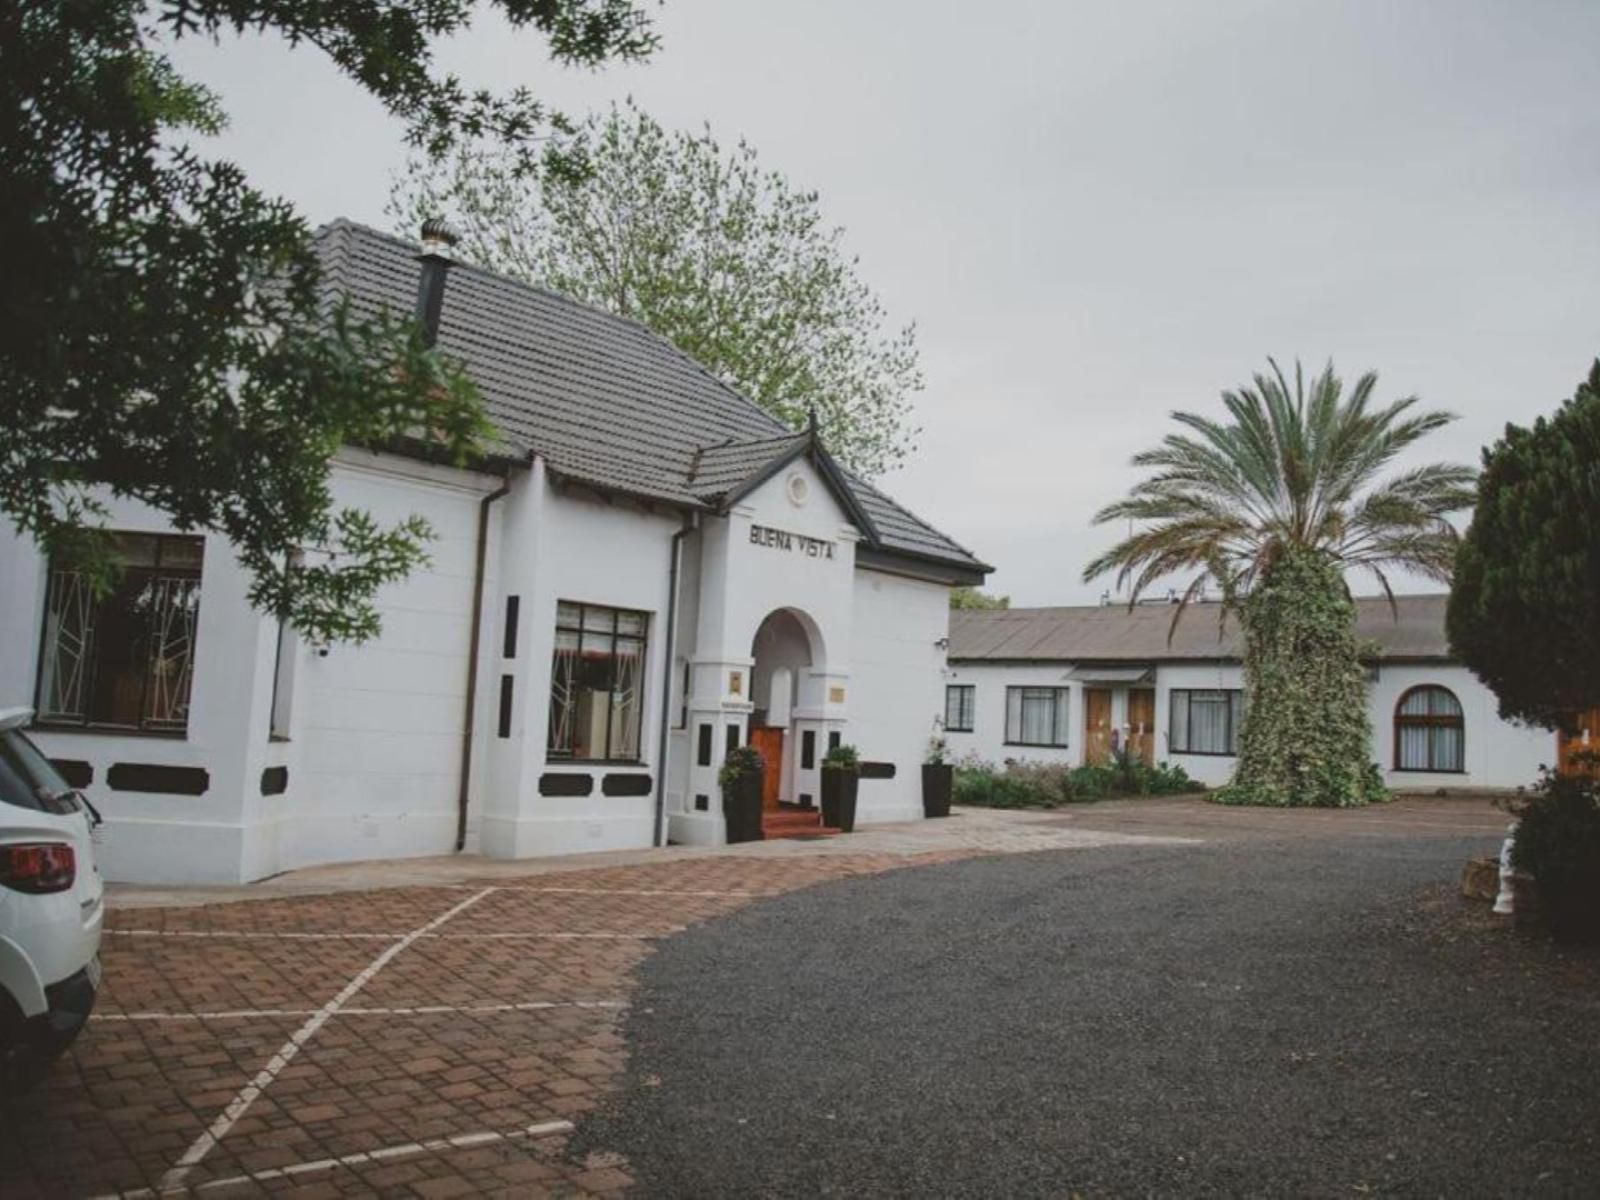 Manor Guest House Lydenburg Mpumalanga South Africa Unsaturated, House, Building, Architecture, Car, Vehicle